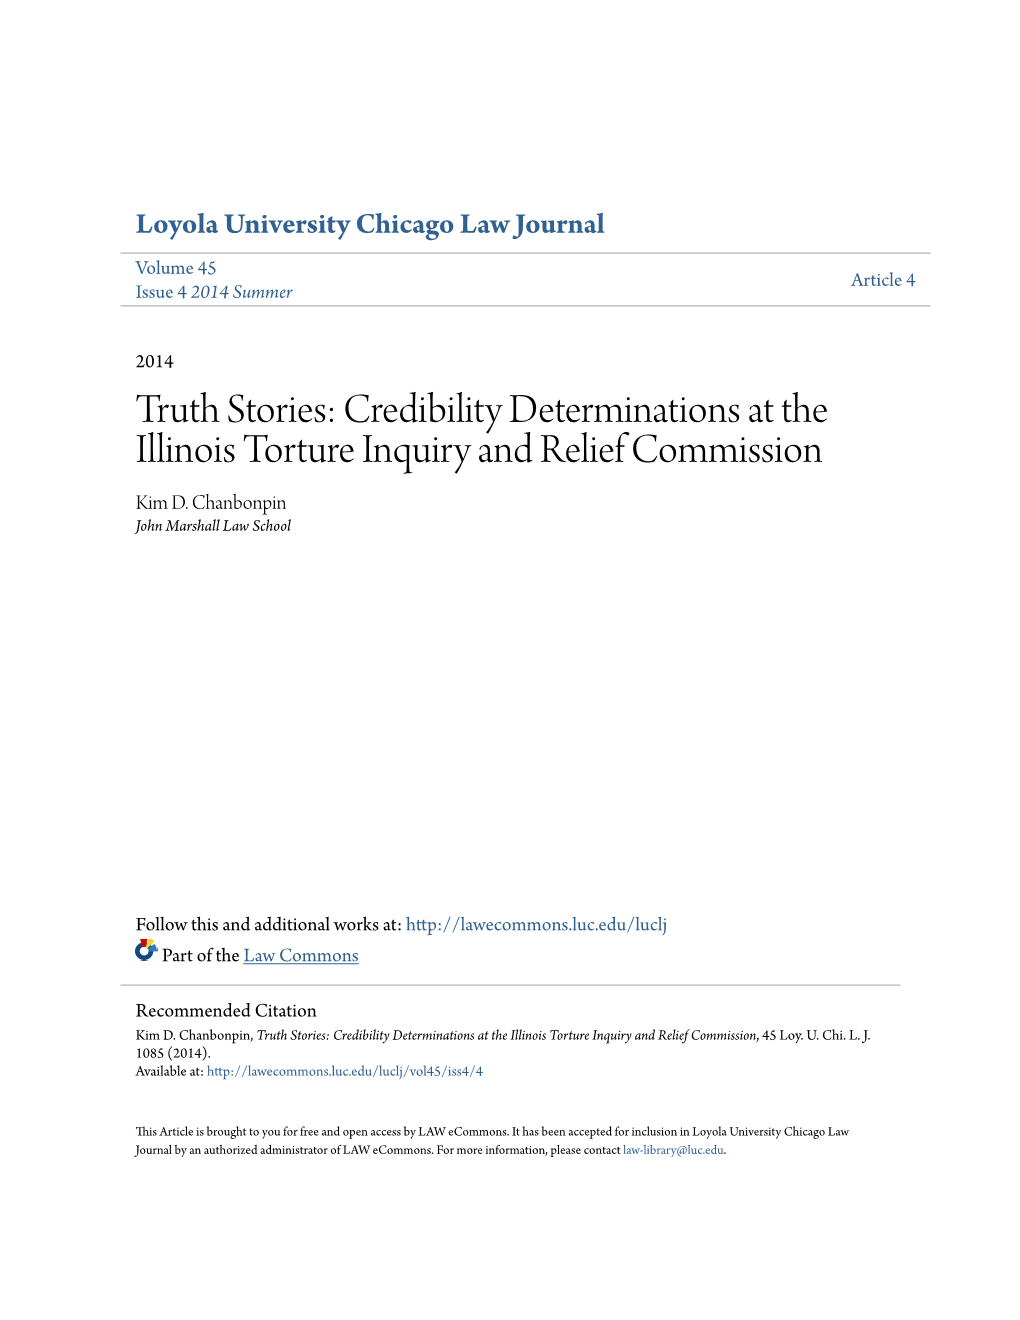 Credibility Determinations at the Illinois Torture Inquiry and Relief Commission Kim D